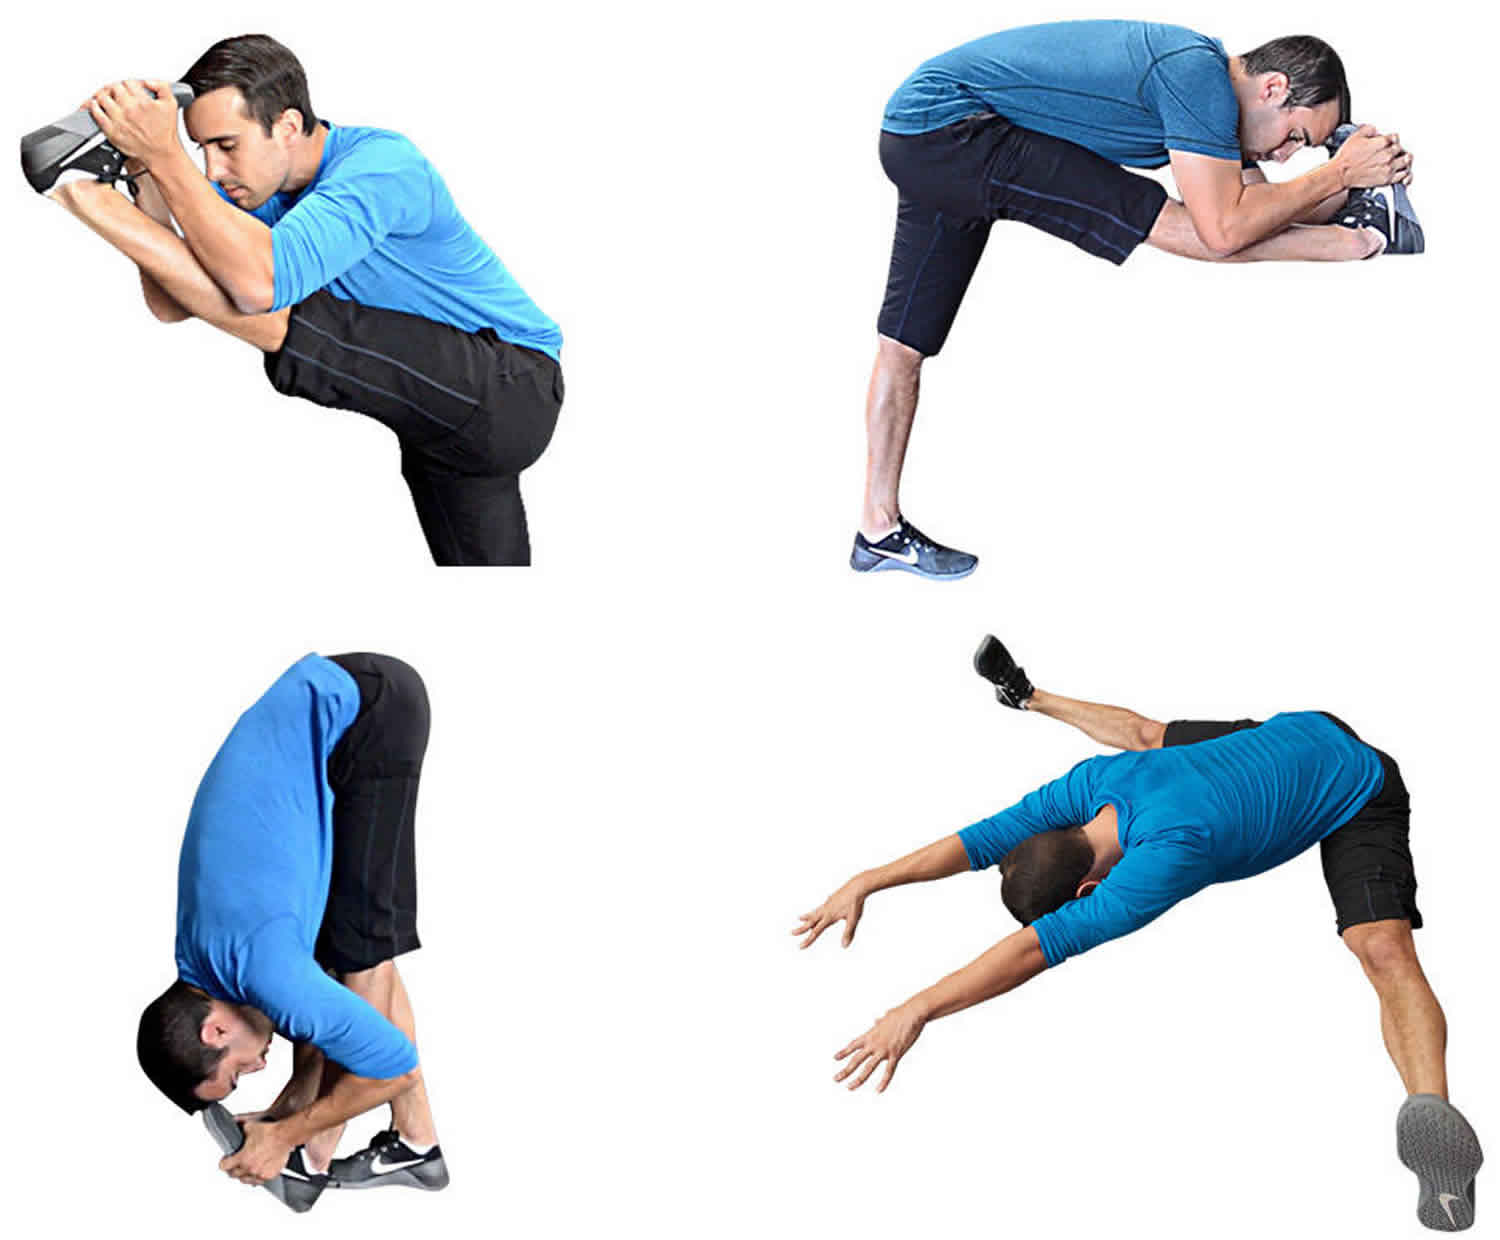 Ballistic Stretching Types Disadvantages How Ballistic Stretching Is Done